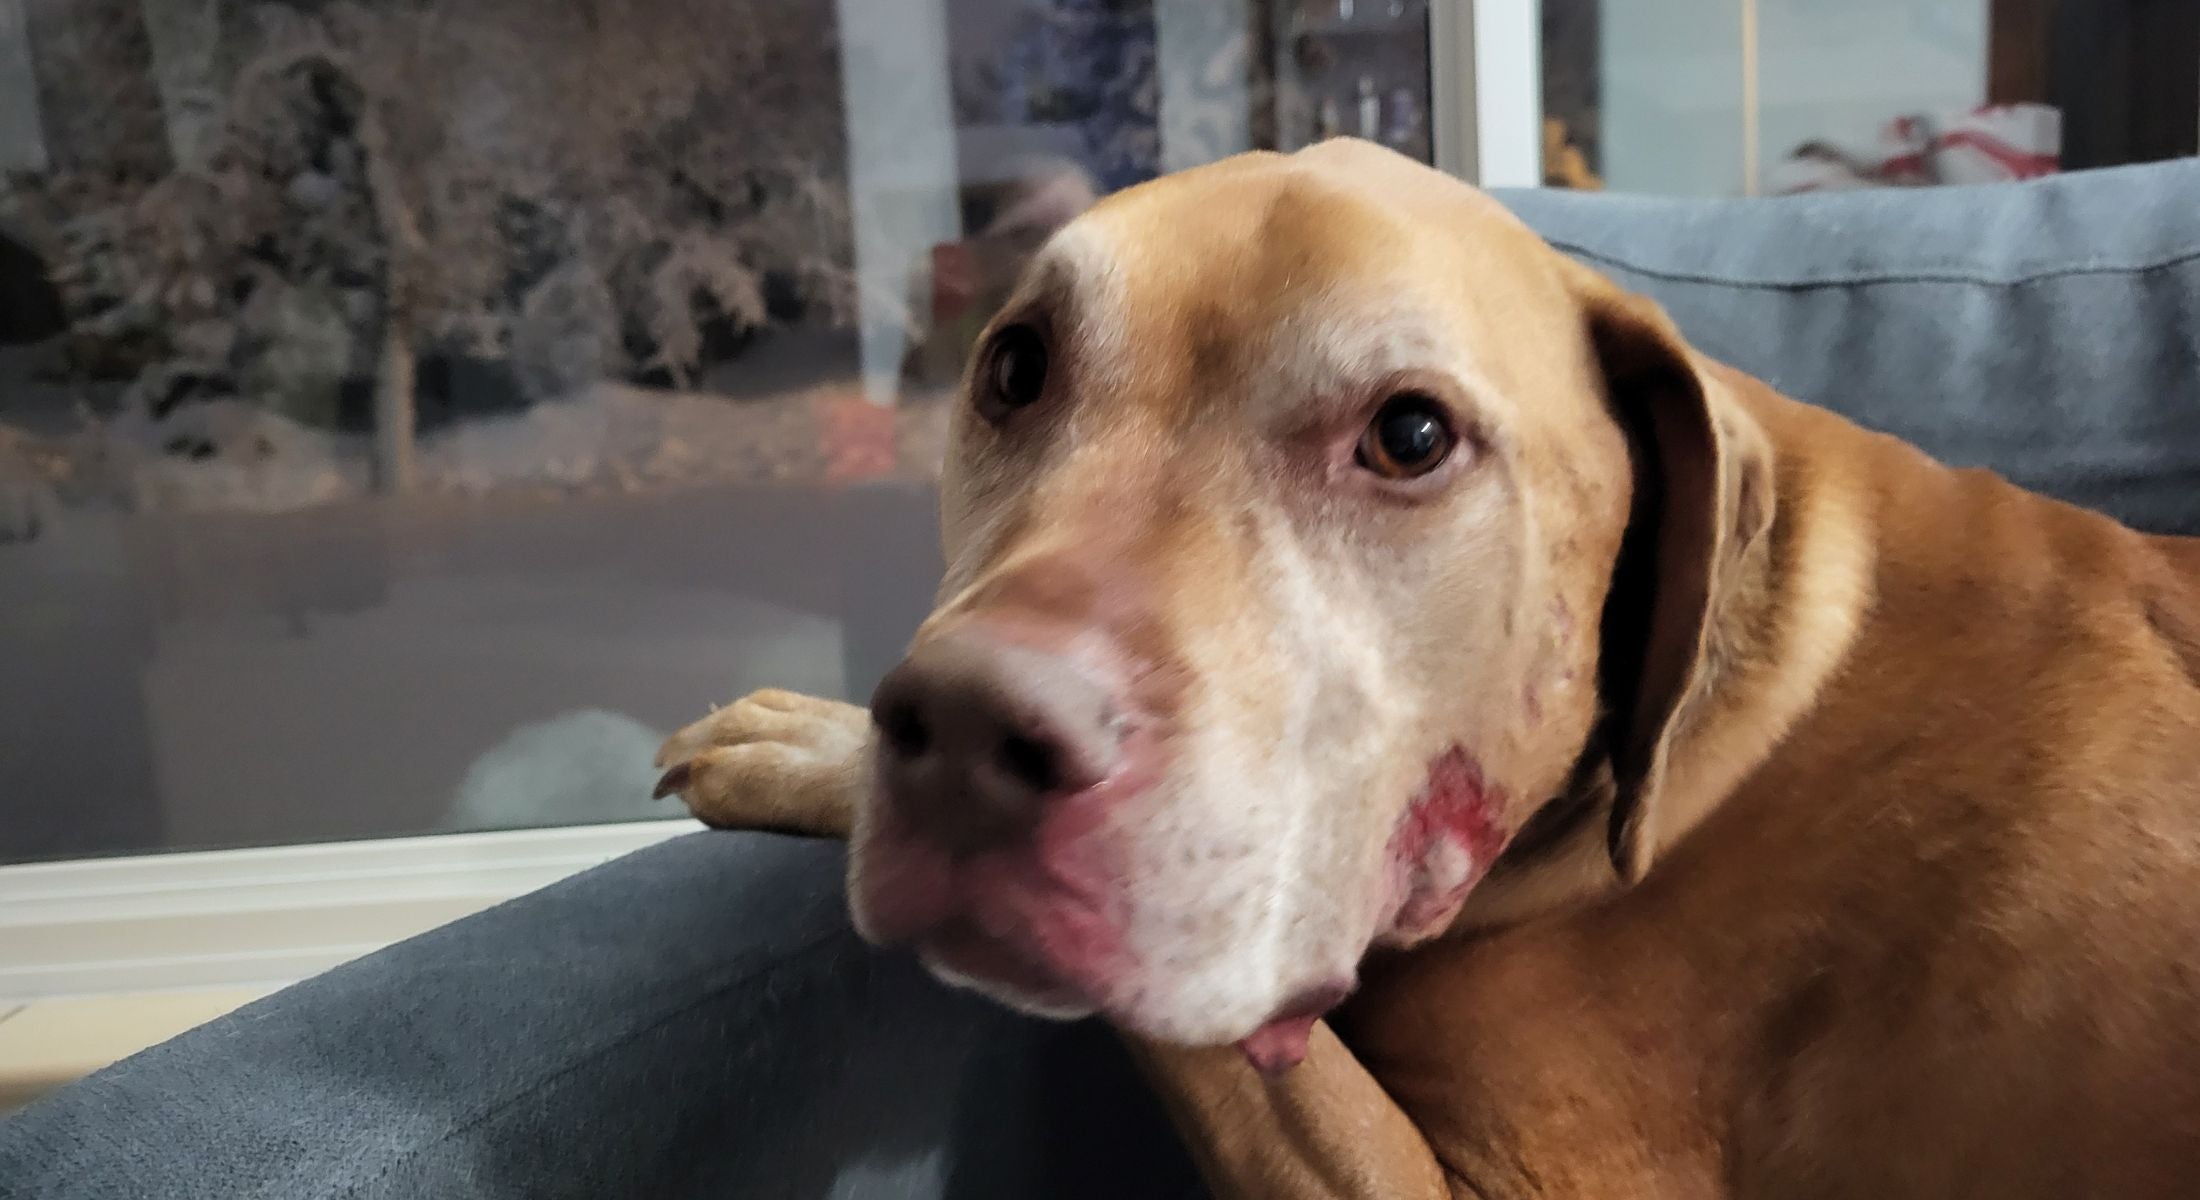 apricot colored dog sitting on the couch looking at the photographer with a sad expression, dried blood is on his jaw after being attacked by a loose dog.